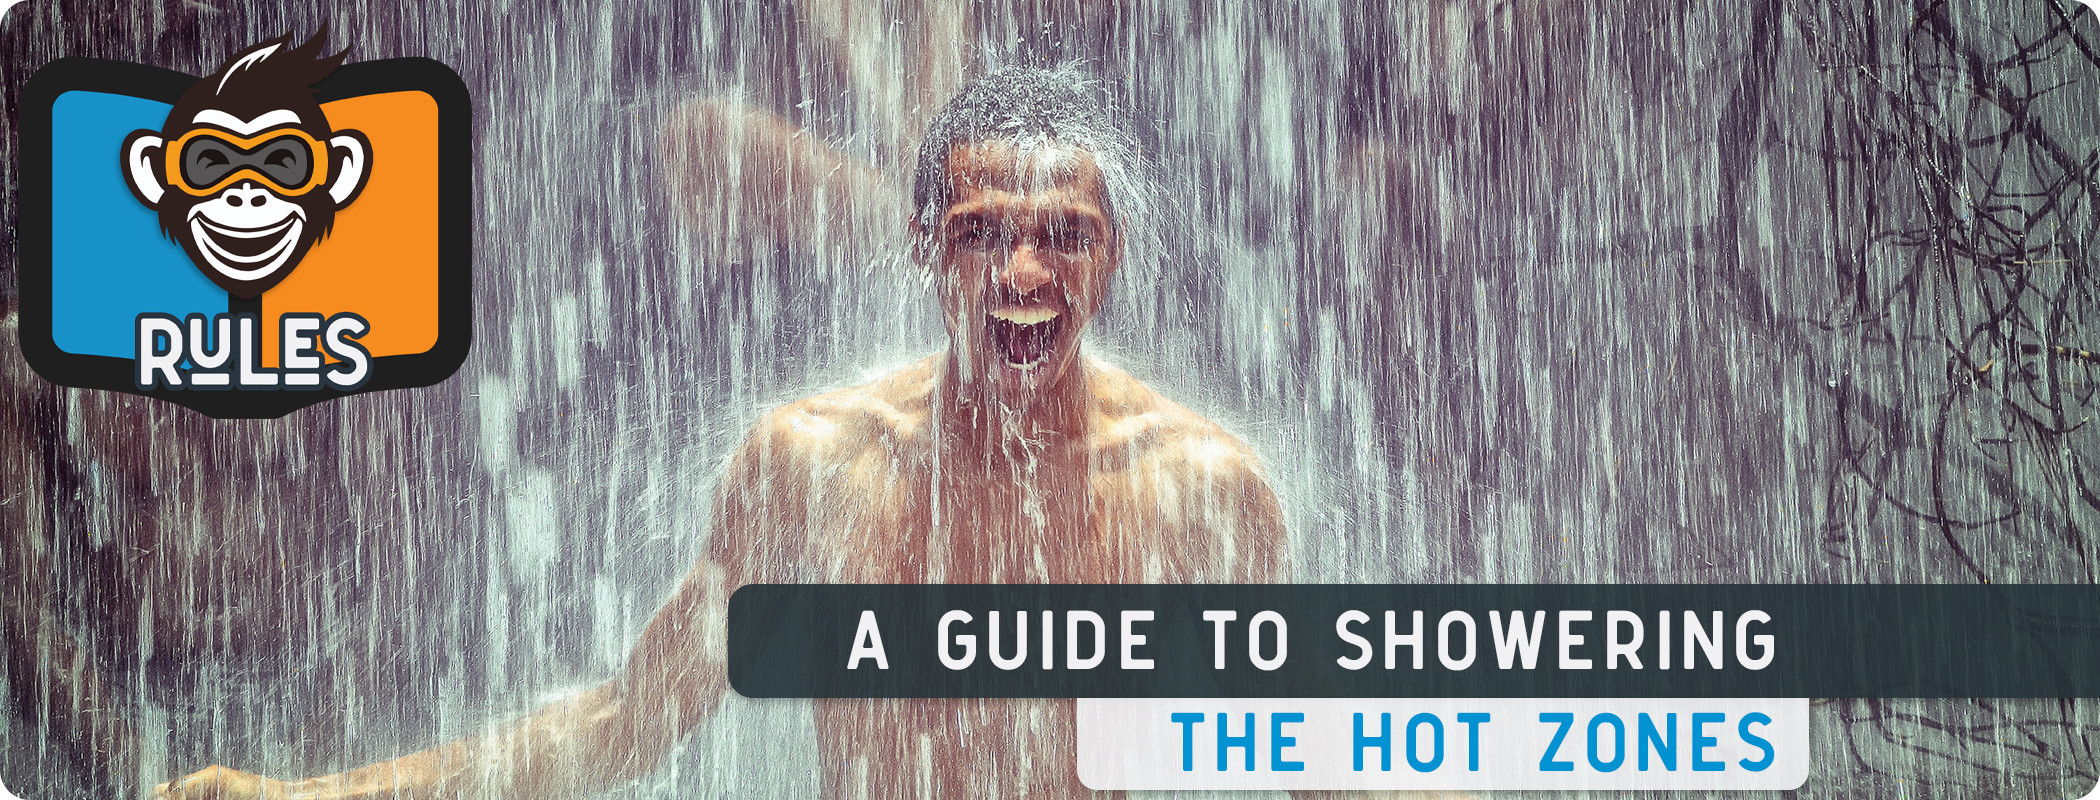 A Guys's Guide To Showering